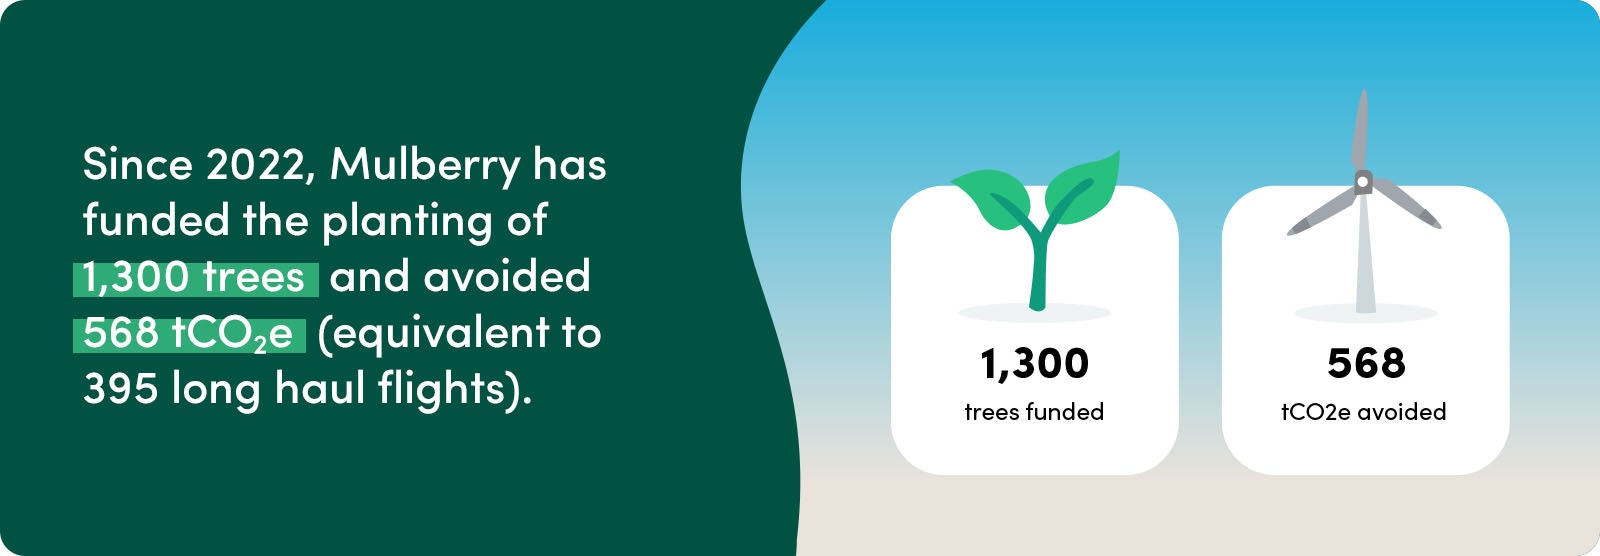 Since 2022, Mulberry has funded the planting of 1,300 trees and avoided 568 tCO2e (equivalent to 395 long haul flights)